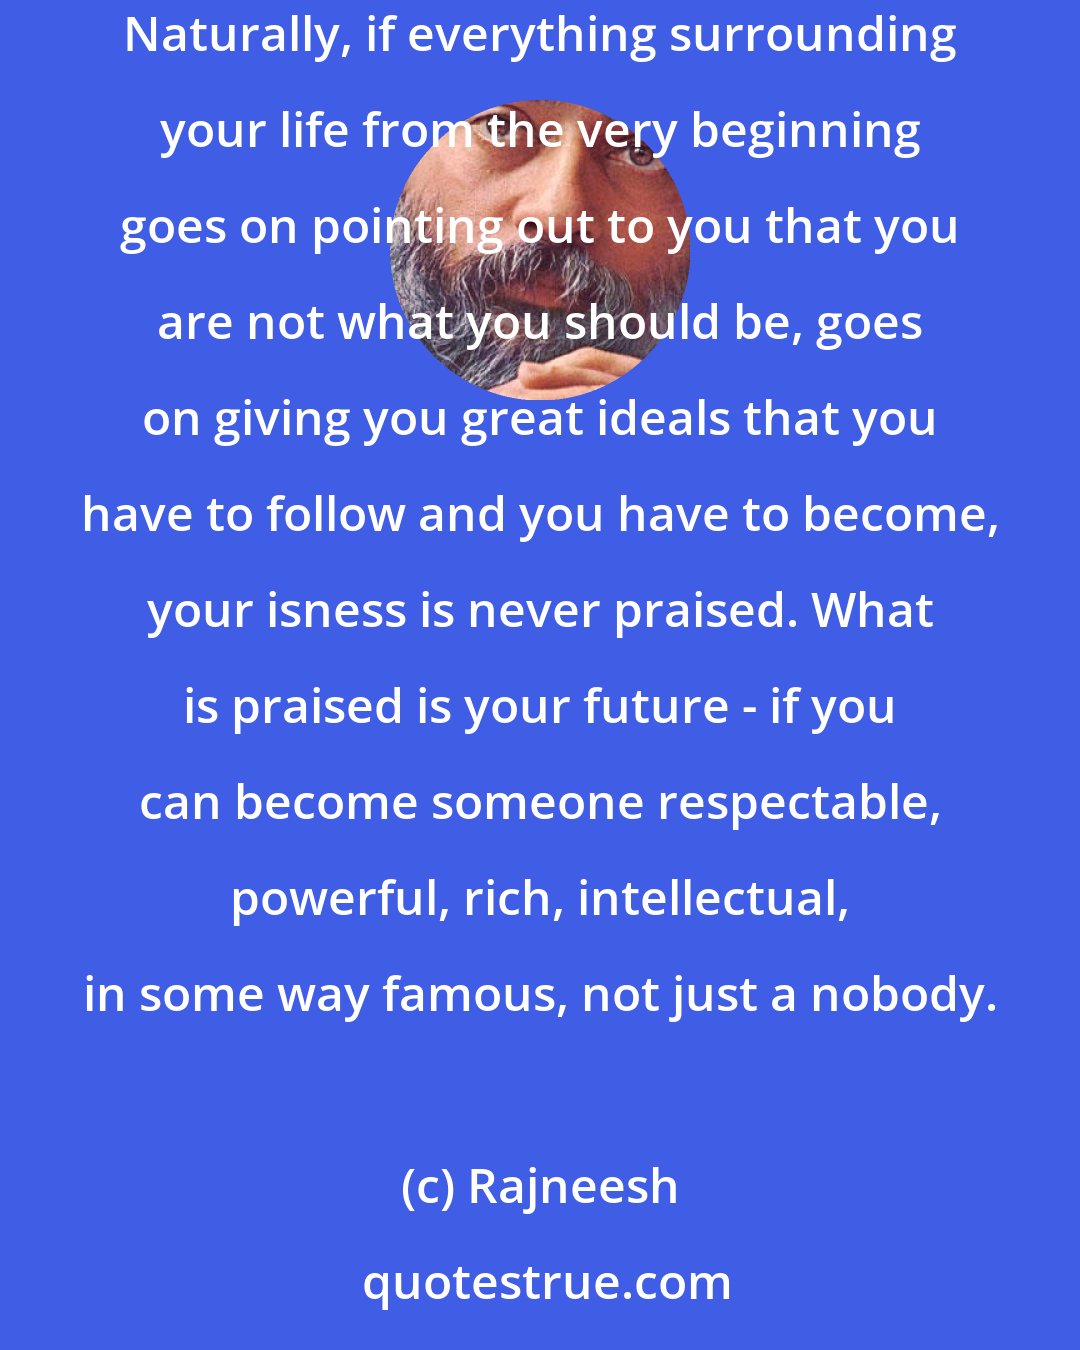 Rajneesh: Just being alive is such a gift, but nobody ever told you to be thankful to existence. On the contrary, everyone was grumpy, complaining. Naturally, if everything surrounding your life from the very beginning goes on pointing out to you that you are not what you should be, goes on giving you great ideals that you have to follow and you have to become, your isness is never praised. What is praised is your future - if you can become someone respectable, powerful, rich, intellectual, in some way famous, not just a nobody.